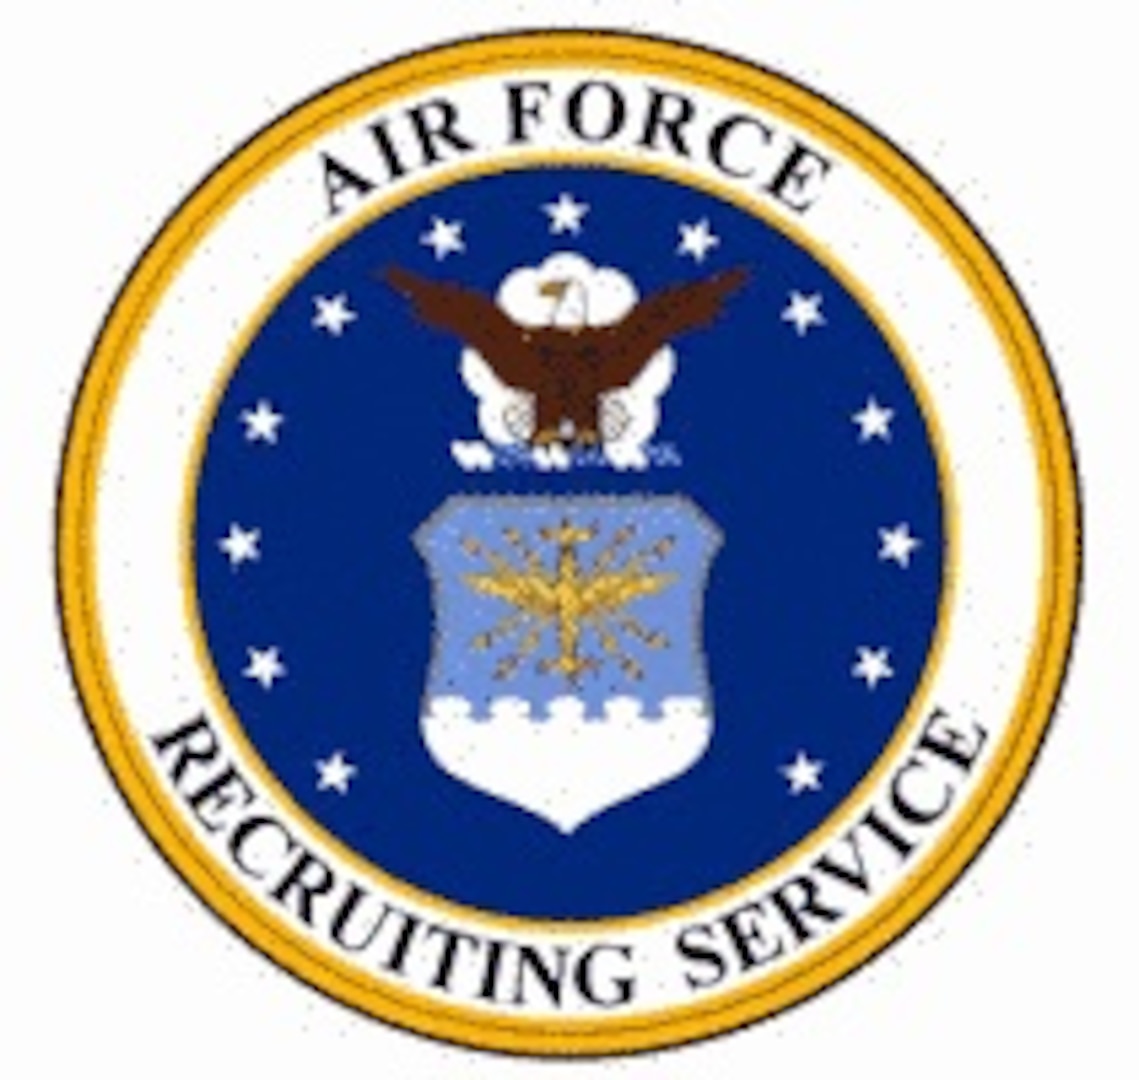 Facing recruiting headwinds, Air Force offers thousands in new